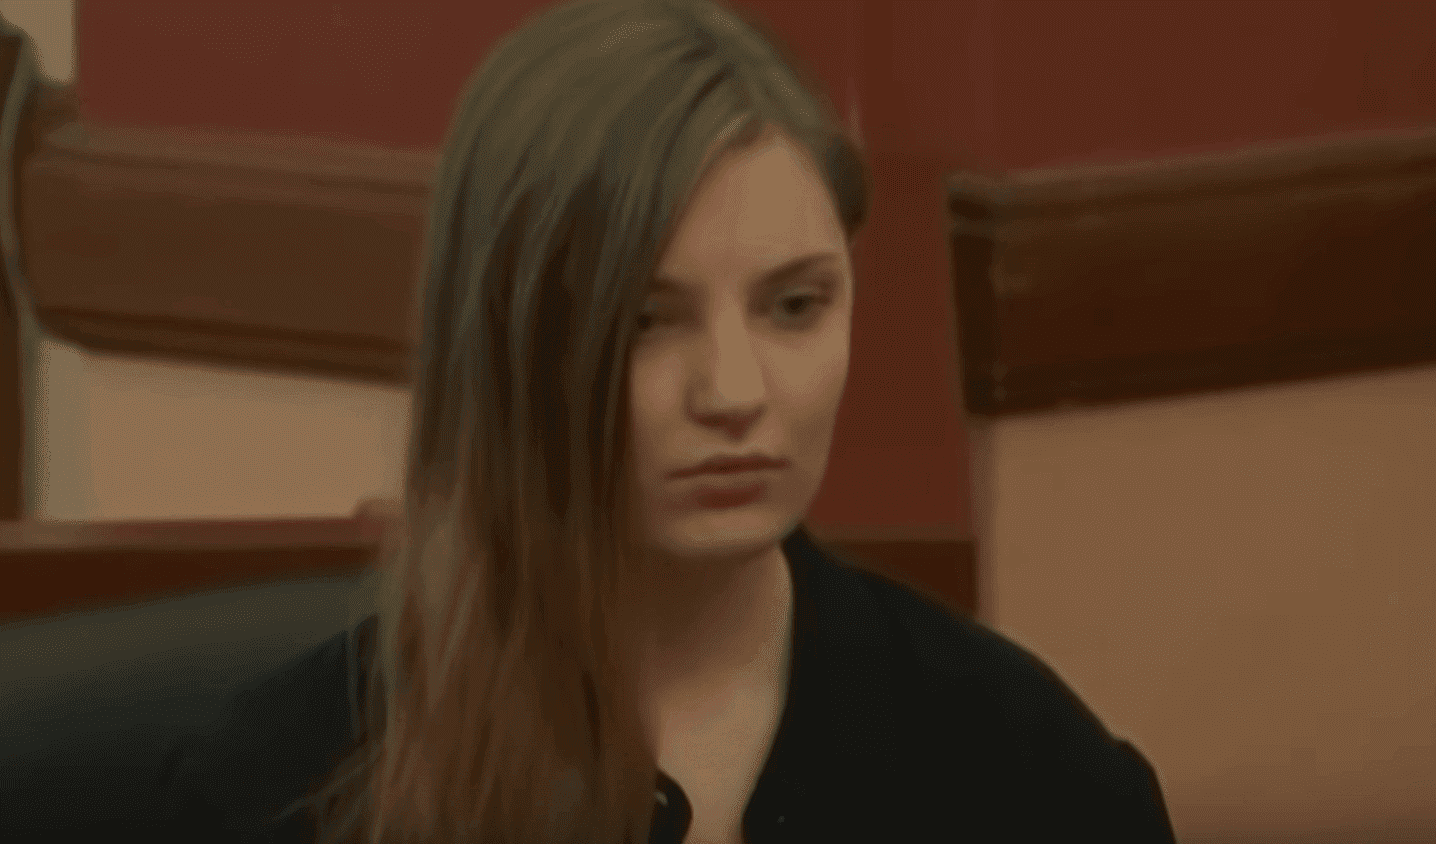 Cheyanne Harris remains stone-cold as she hears the jury's verdict | Photo: YouTube/Law & Crime Network